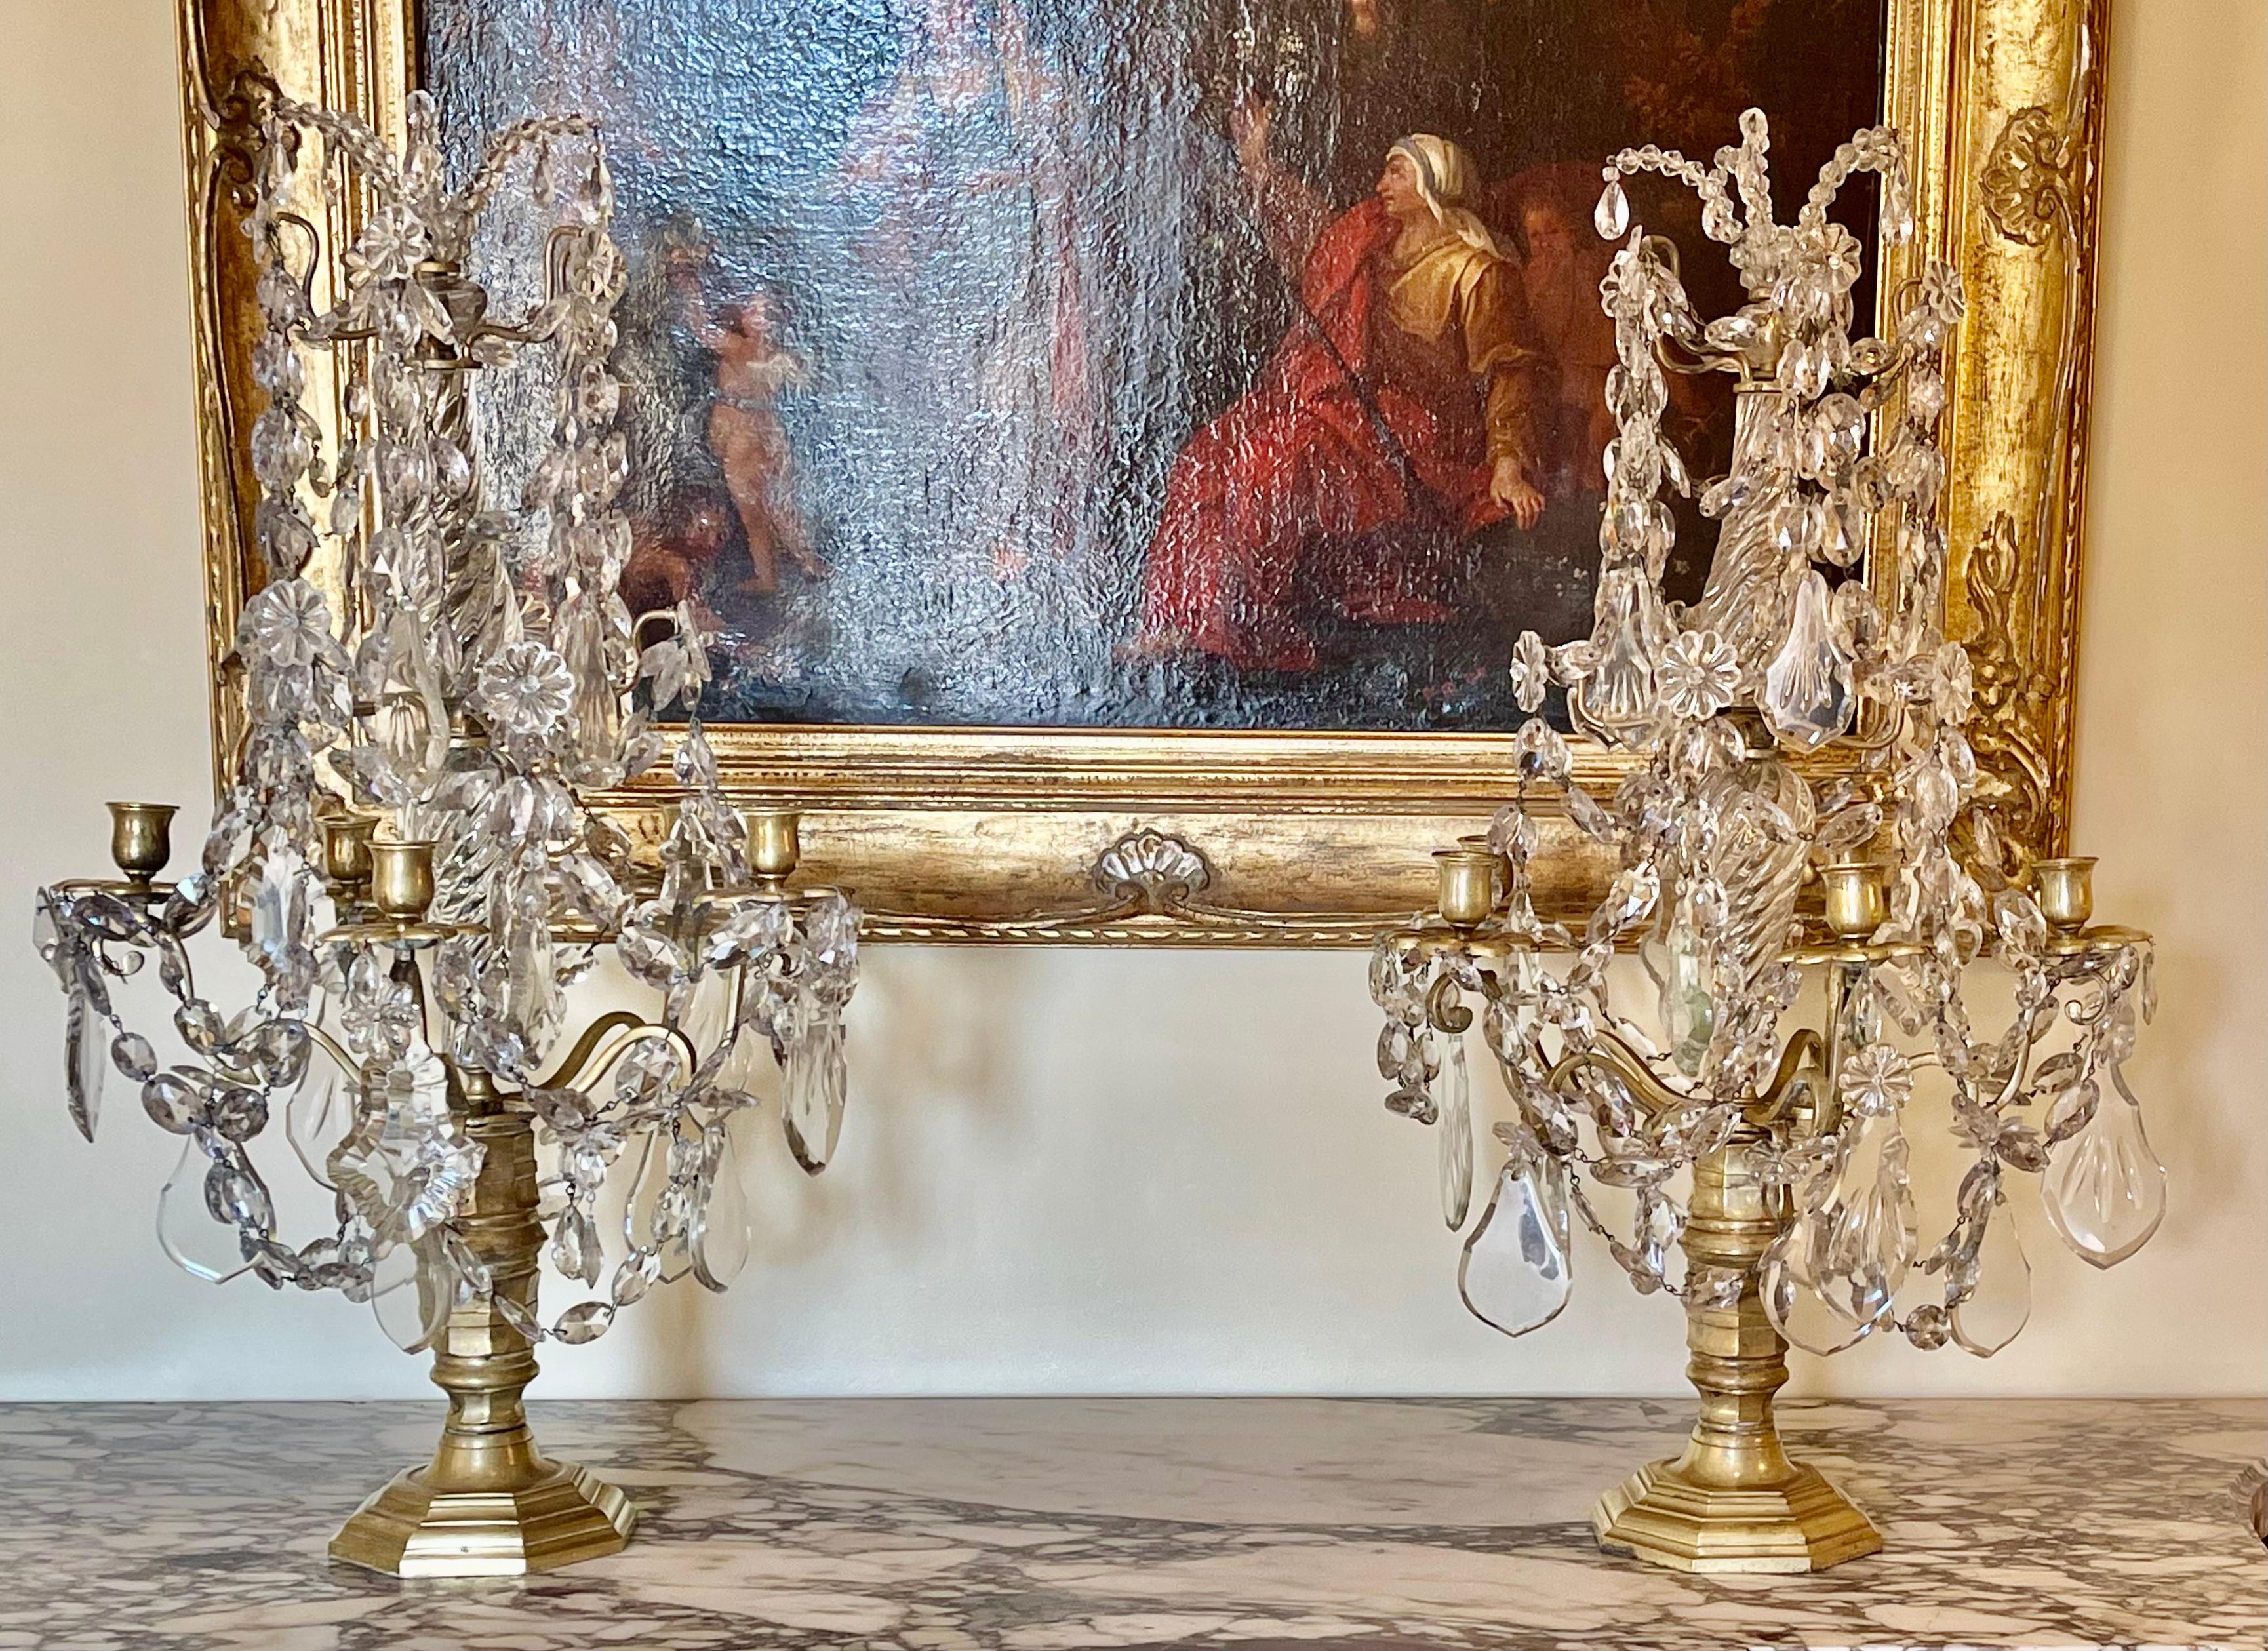 Sumptuous pair of Louis XIV period crystal and bronze candelabra dating from the 17th century.
They are complete and in good condition. Each girandole has 5 lights adorned with tassels with end candle holders. The whole is supported by a baluster